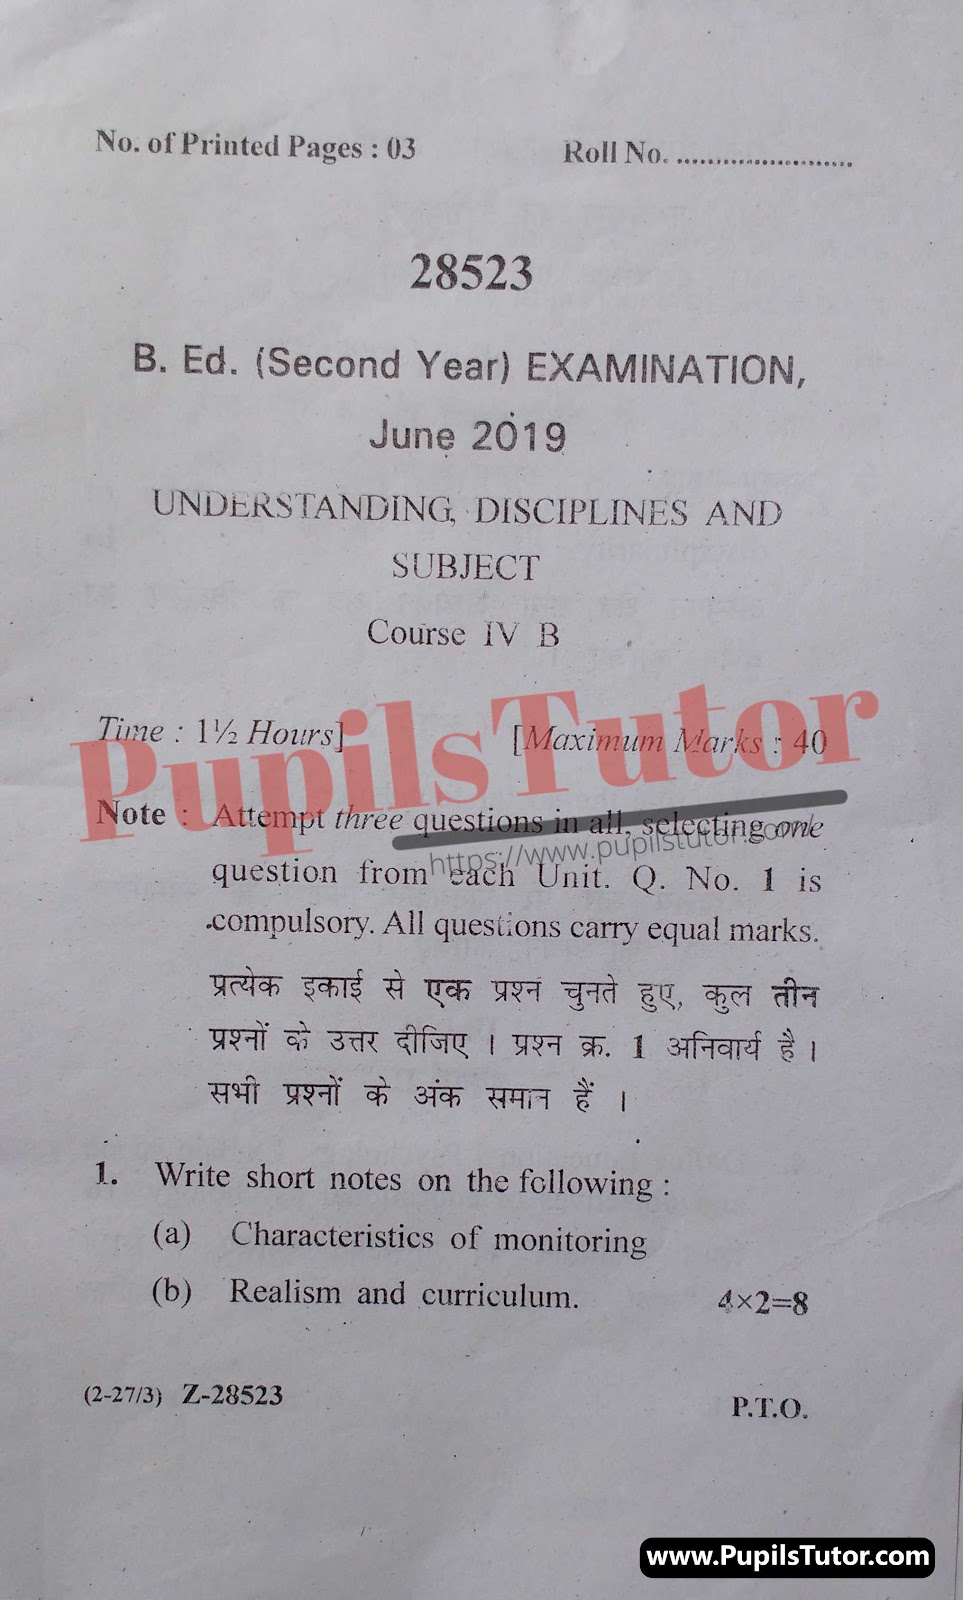 CRSU (Chaudhary Ranbir Singh University, Jind Haryana) BEd Regular Exam Second Year Previous Year Understanding Disciplines And Subjects Question Paper For June, 2019 Exam (Question Paper Page 1) - pupilstutor.com